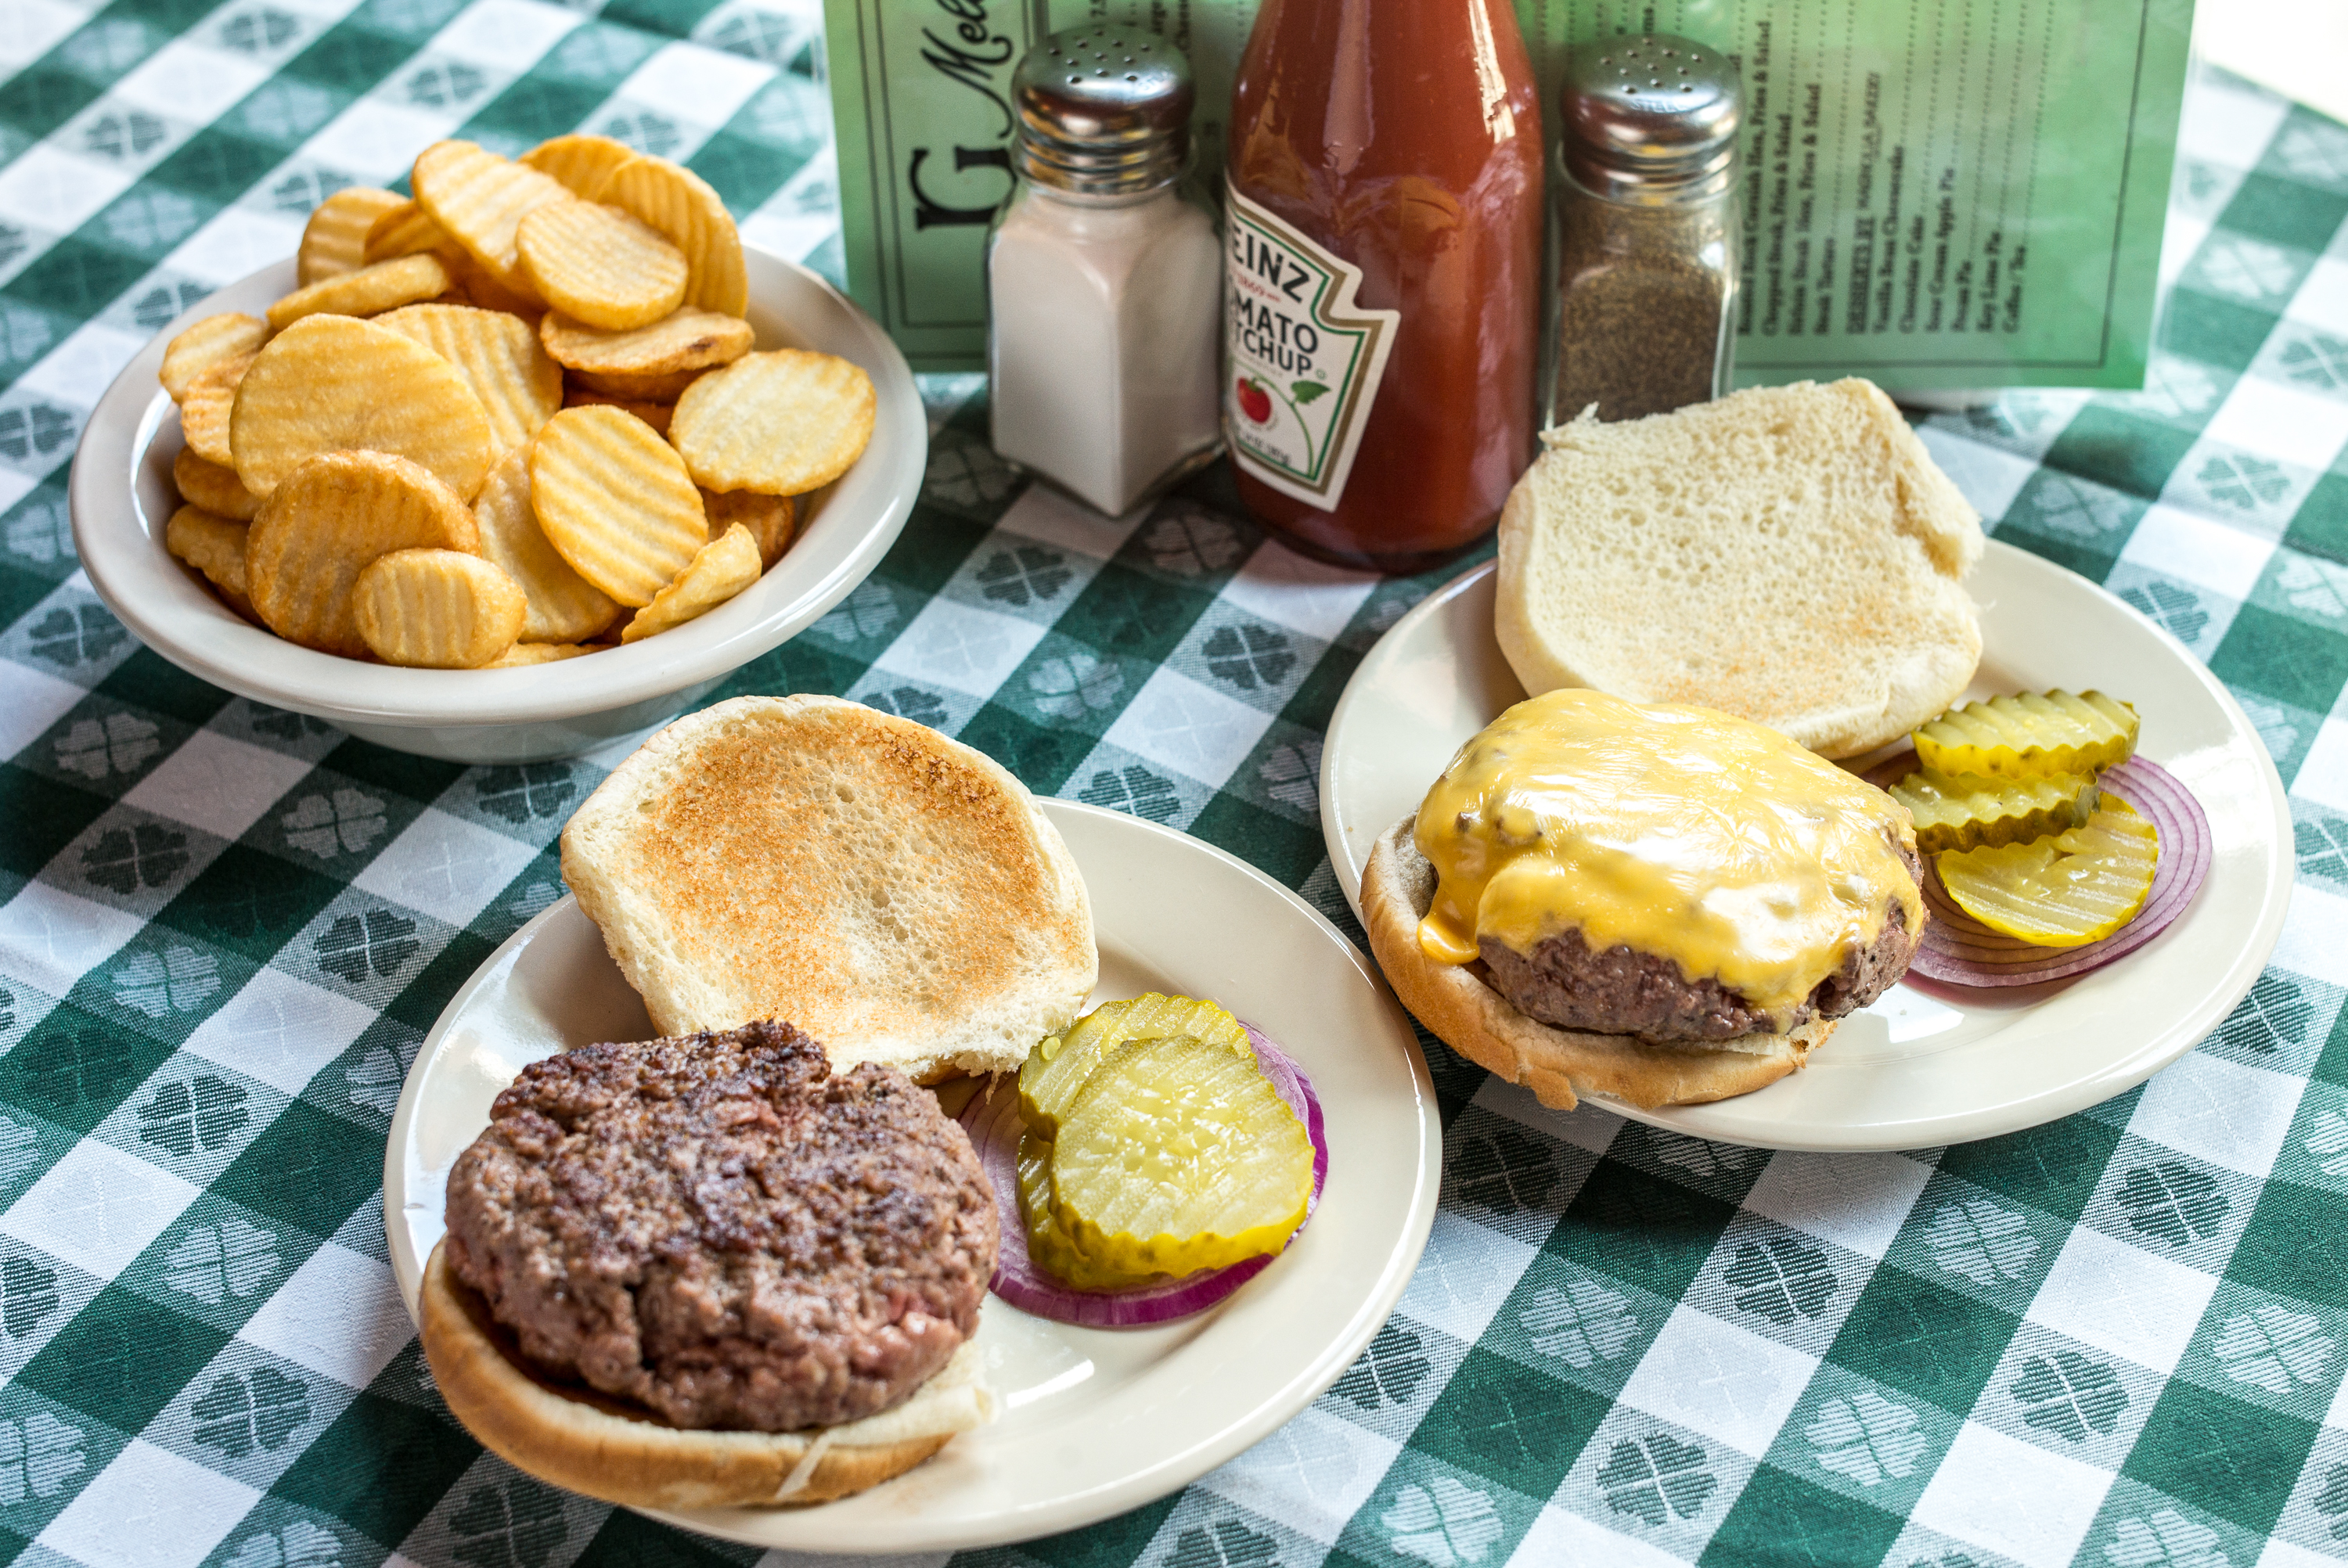 A burger and a cheeseburger at J.G. Melon sit on a green checkered tablecloth, while a plate of fries sits nearby.